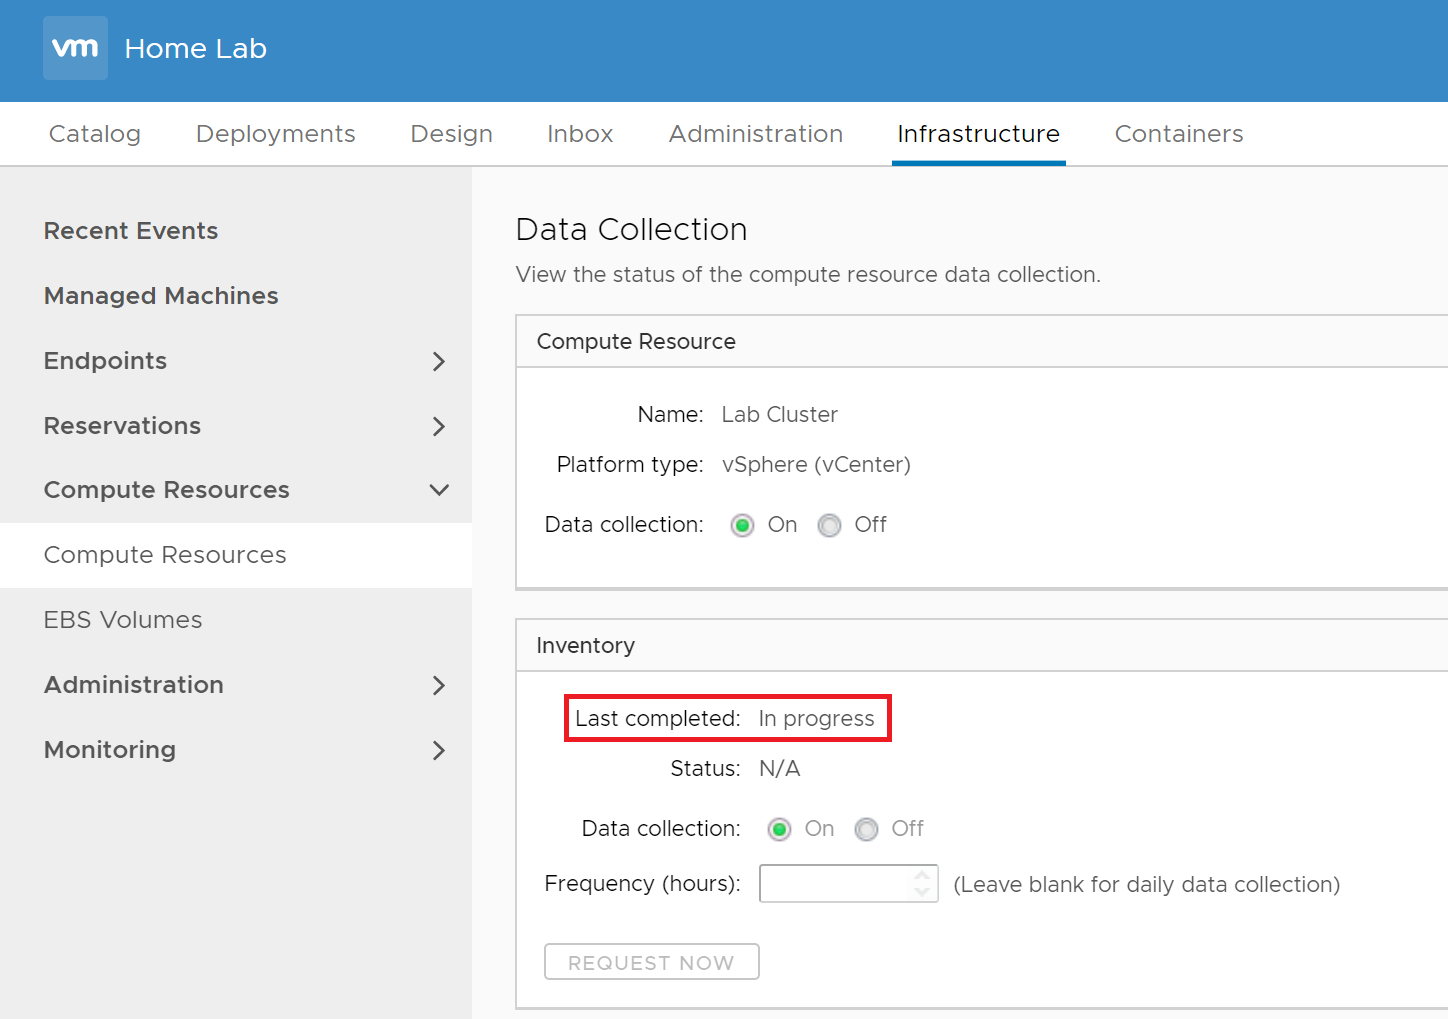 vRealize Automation 7.6 - Compute Resource Data Collection Status - In Progress